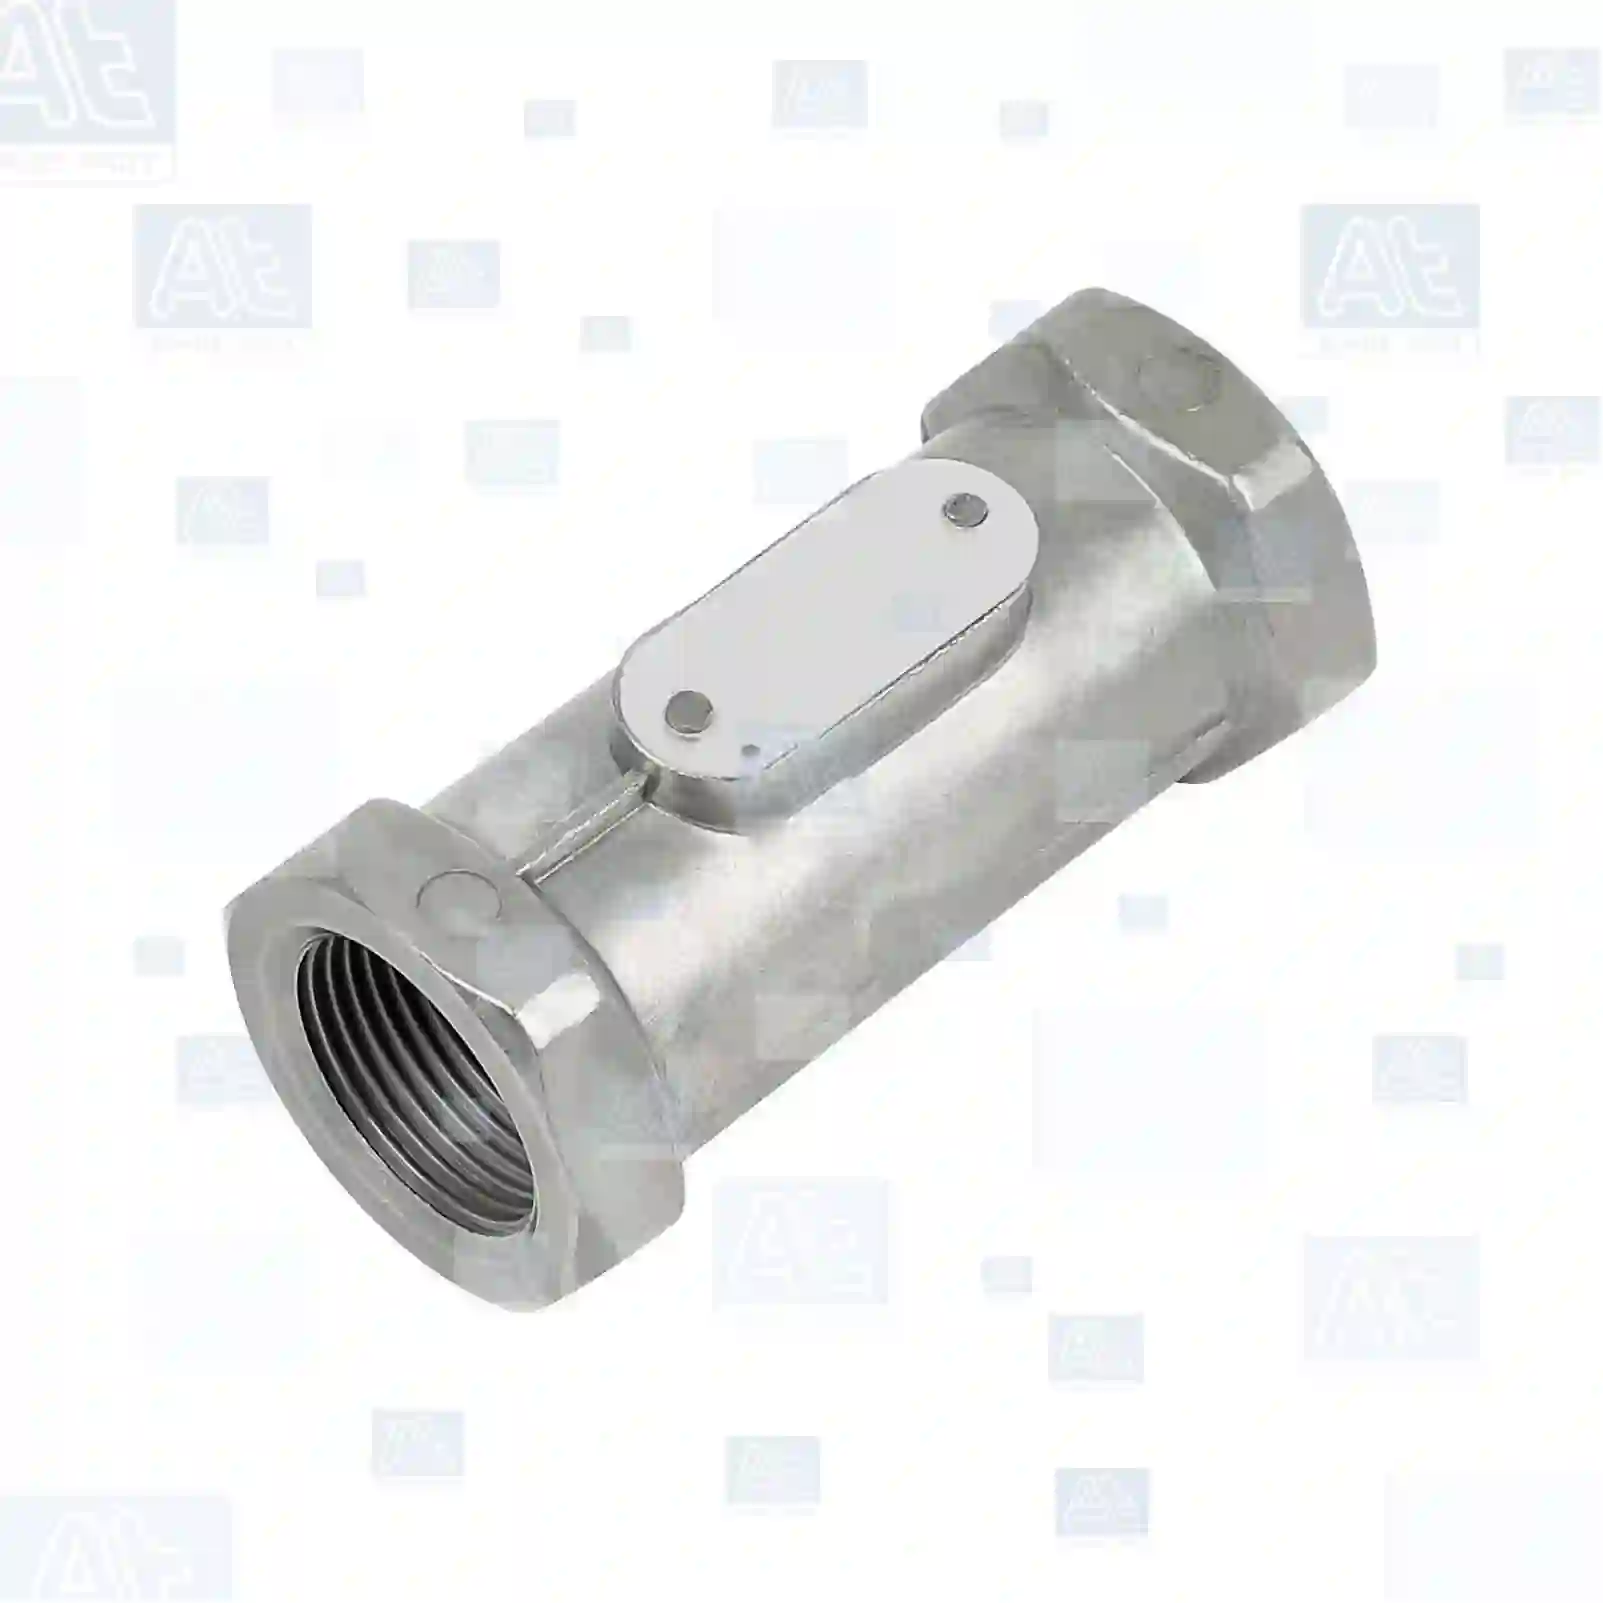 Relief valve, 77714676, 4004290744, 0587808, 1524863, 288495, 307475, 507808, 587808, F255880020010, G822880020120, A78860M10A02, AJX1009, CF3519226, 150980, 01125484, 02524385, 03342046, 04463747, 04700564, 04700995, 04712513, 04760670, 42007409, 500227227, 5801102155, 61601342, 71005206, 77392, 500945192, 945192, 502931701, 502939014, 81521206003, 81521206004, 81521206025, 81521206028, 81521206029, 81521206030, 81521206040, 81521206075, 85300016535, 88521206006, 88521206200, 0004204471, 0004290444, 0004290744, 0004311207, 0034290744, 0034292944, 0034296244, 0054296644, 011017366, 011017367, 110250600, 110250900, 46051-9X600, 49500701000, 495074, 16H2503780AA, 5000121974, 5000121975, 5000785947, 5021170093, 1012118, 1912297, 8283618000, 1102506000, 400032, 2V5607351, ZG50614-0008 ||  77714676 At Spare Part | Engine, Accelerator Pedal, Camshaft, Connecting Rod, Crankcase, Crankshaft, Cylinder Head, Engine Suspension Mountings, Exhaust Manifold, Exhaust Gas Recirculation, Filter Kits, Flywheel Housing, General Overhaul Kits, Engine, Intake Manifold, Oil Cleaner, Oil Cooler, Oil Filter, Oil Pump, Oil Sump, Piston & Liner, Sensor & Switch, Timing Case, Turbocharger, Cooling System, Belt Tensioner, Coolant Filter, Coolant Pipe, Corrosion Prevention Agent, Drive, Expansion Tank, Fan, Intercooler, Monitors & Gauges, Radiator, Thermostat, V-Belt / Timing belt, Water Pump, Fuel System, Electronical Injector Unit, Feed Pump, Fuel Filter, cpl., Fuel Gauge Sender,  Fuel Line, Fuel Pump, Fuel Tank, Injection Line Kit, Injection Pump, Exhaust System, Clutch & Pedal, Gearbox, Propeller Shaft, Axles, Brake System, Hubs & Wheels, Suspension, Leaf Spring, Universal Parts / Accessories, Steering, Electrical System, Cabin Relief valve, 77714676, 4004290744, 0587808, 1524863, 288495, 307475, 507808, 587808, F255880020010, G822880020120, A78860M10A02, AJX1009, CF3519226, 150980, 01125484, 02524385, 03342046, 04463747, 04700564, 04700995, 04712513, 04760670, 42007409, 500227227, 5801102155, 61601342, 71005206, 77392, 500945192, 945192, 502931701, 502939014, 81521206003, 81521206004, 81521206025, 81521206028, 81521206029, 81521206030, 81521206040, 81521206075, 85300016535, 88521206006, 88521206200, 0004204471, 0004290444, 0004290744, 0004311207, 0034290744, 0034292944, 0034296244, 0054296644, 011017366, 011017367, 110250600, 110250900, 46051-9X600, 49500701000, 495074, 16H2503780AA, 5000121974, 5000121975, 5000785947, 5021170093, 1012118, 1912297, 8283618000, 1102506000, 400032, 2V5607351, ZG50614-0008 ||  77714676 At Spare Part | Engine, Accelerator Pedal, Camshaft, Connecting Rod, Crankcase, Crankshaft, Cylinder Head, Engine Suspension Mountings, Exhaust Manifold, Exhaust Gas Recirculation, Filter Kits, Flywheel Housing, General Overhaul Kits, Engine, Intake Manifold, Oil Cleaner, Oil Cooler, Oil Filter, Oil Pump, Oil Sump, Piston & Liner, Sensor & Switch, Timing Case, Turbocharger, Cooling System, Belt Tensioner, Coolant Filter, Coolant Pipe, Corrosion Prevention Agent, Drive, Expansion Tank, Fan, Intercooler, Monitors & Gauges, Radiator, Thermostat, V-Belt / Timing belt, Water Pump, Fuel System, Electronical Injector Unit, Feed Pump, Fuel Filter, cpl., Fuel Gauge Sender,  Fuel Line, Fuel Pump, Fuel Tank, Injection Line Kit, Injection Pump, Exhaust System, Clutch & Pedal, Gearbox, Propeller Shaft, Axles, Brake System, Hubs & Wheels, Suspension, Leaf Spring, Universal Parts / Accessories, Steering, Electrical System, Cabin